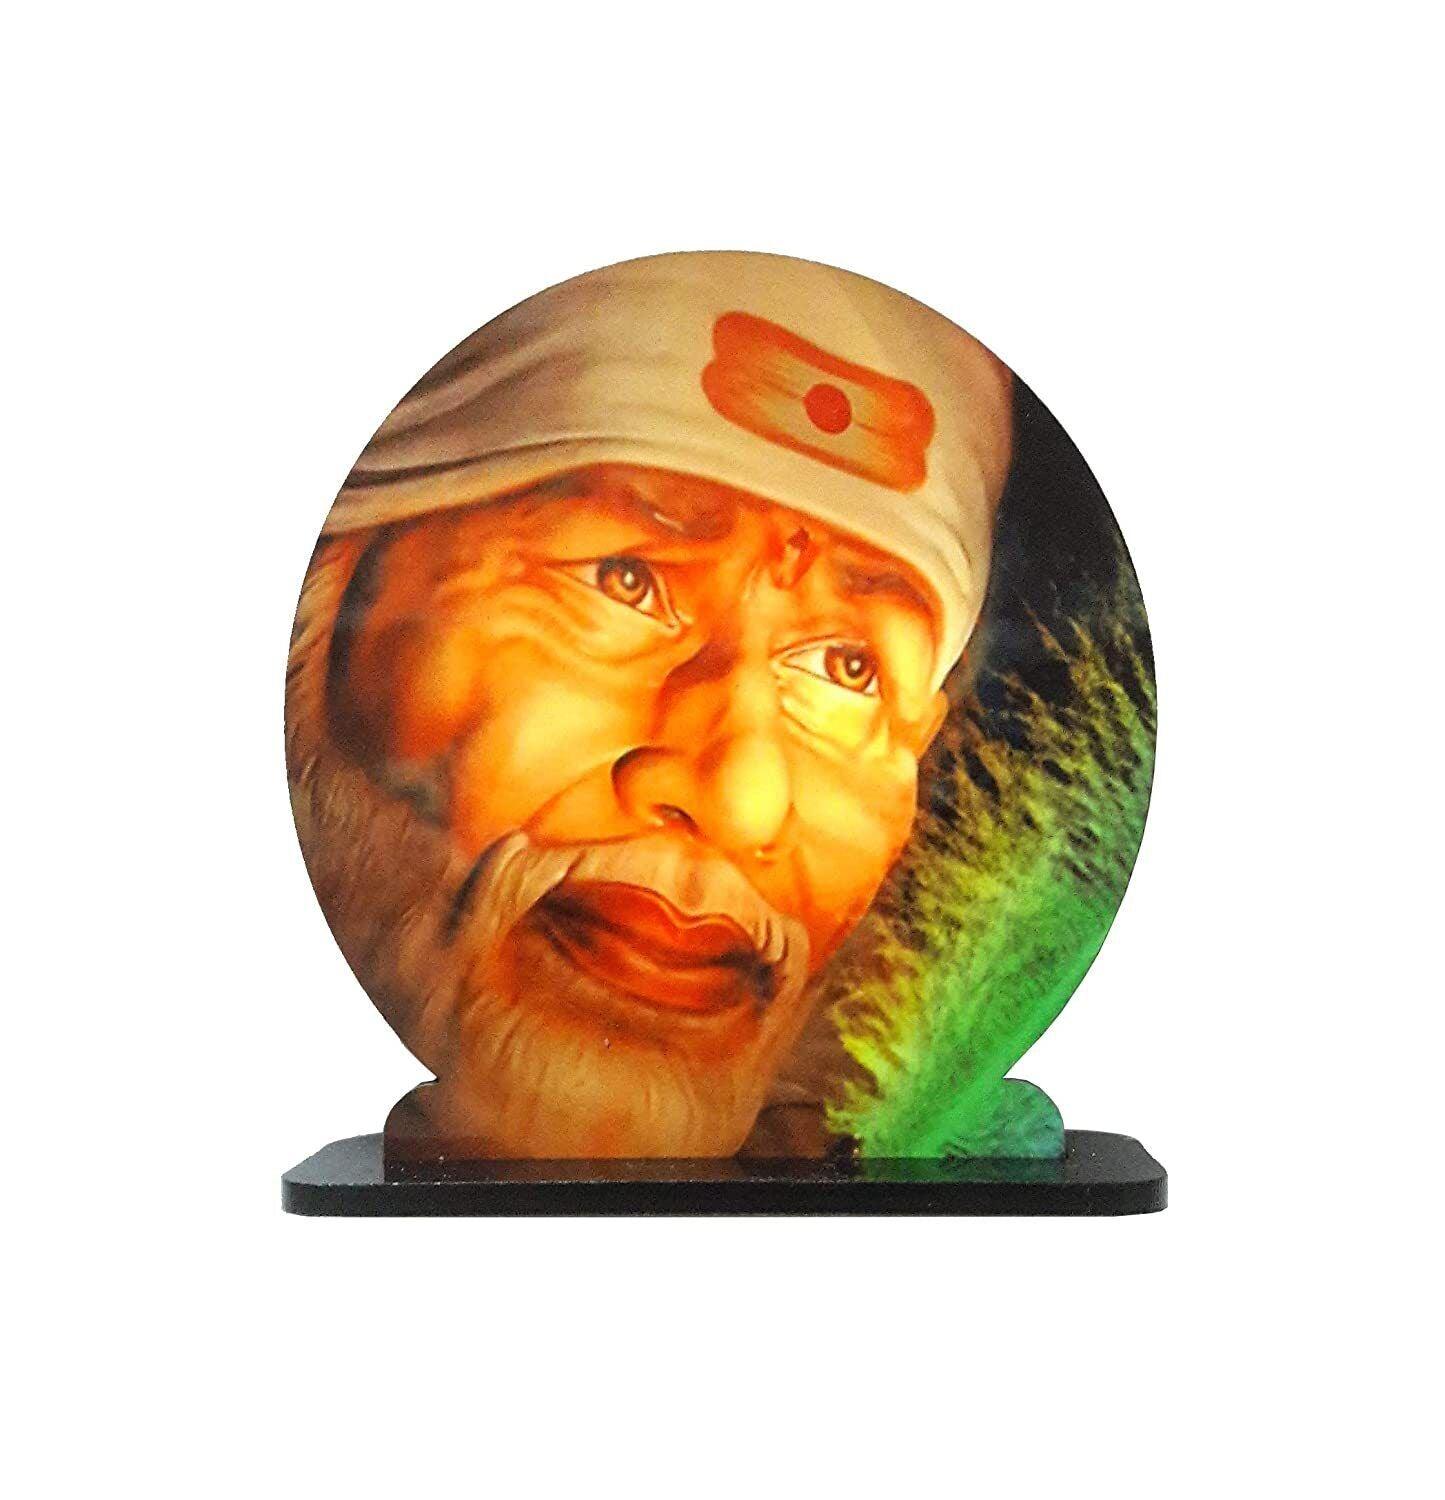 Wooden Handcrafted Sai Baba Idol Statue for Car Dashboard Home & Office - Walgrow.com